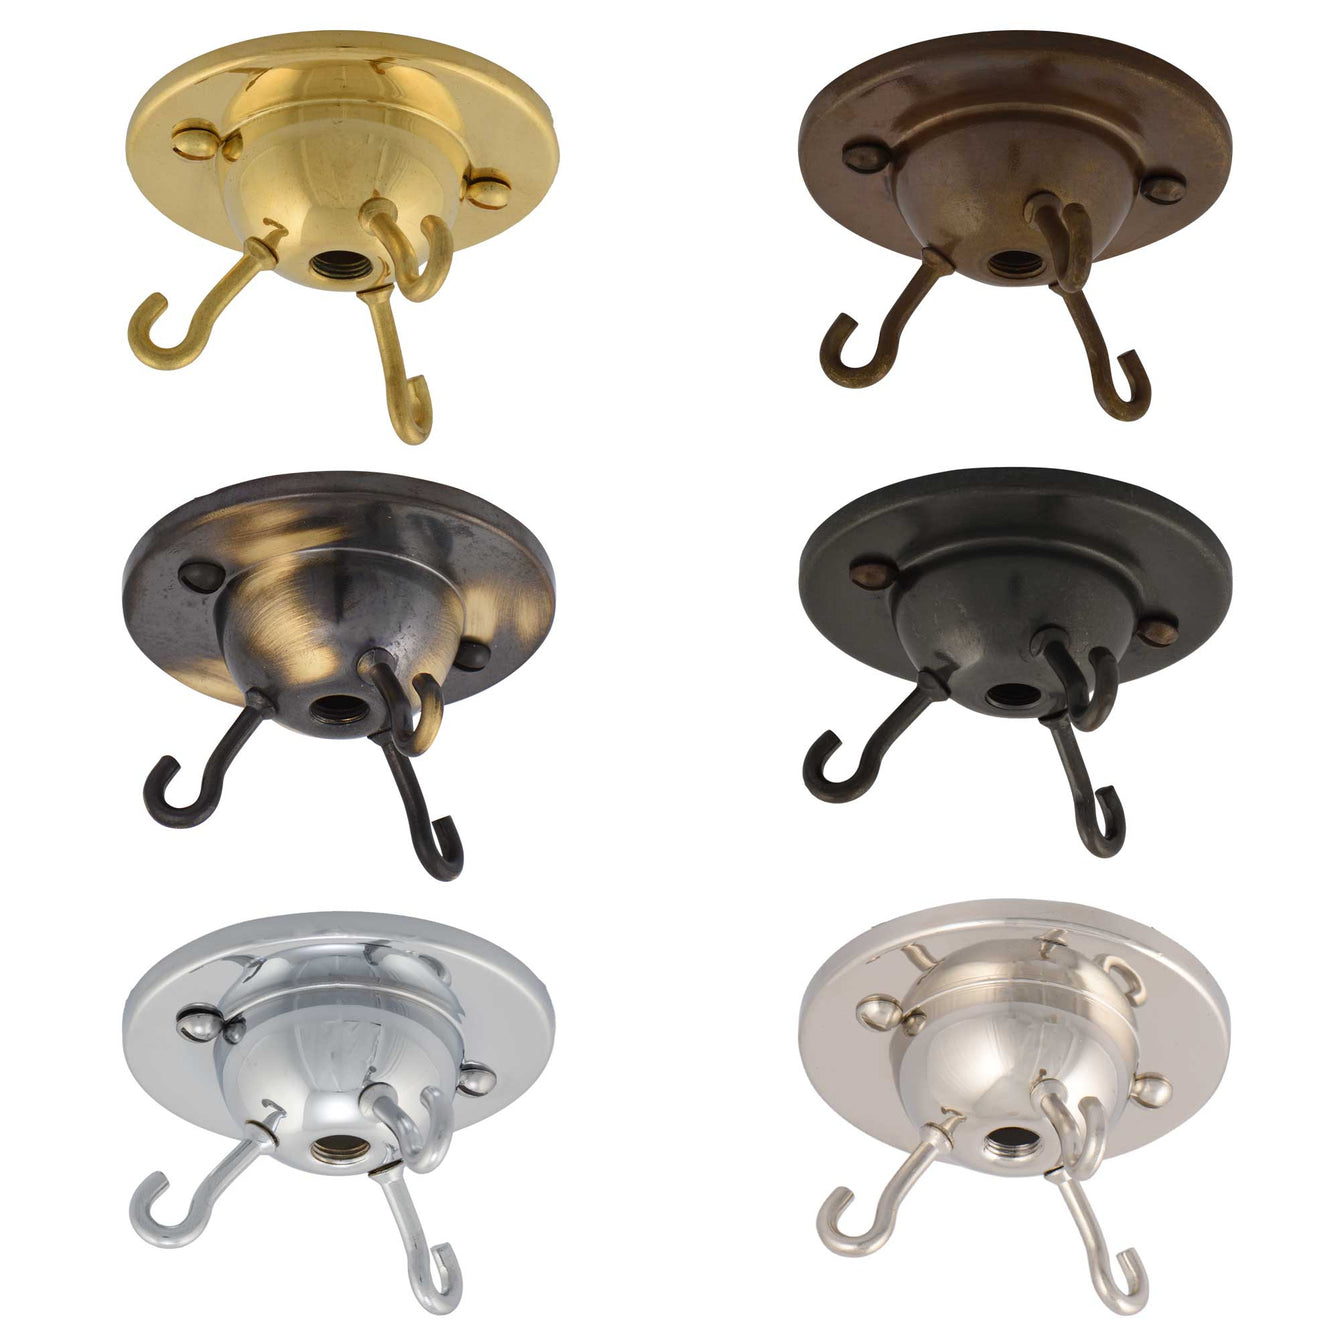 ElekTek 3 Hook Ceiling Rose Plate Suspended Light Fittings Inverted Shades and Chandeliers Traditional Metallic Finishes Brass